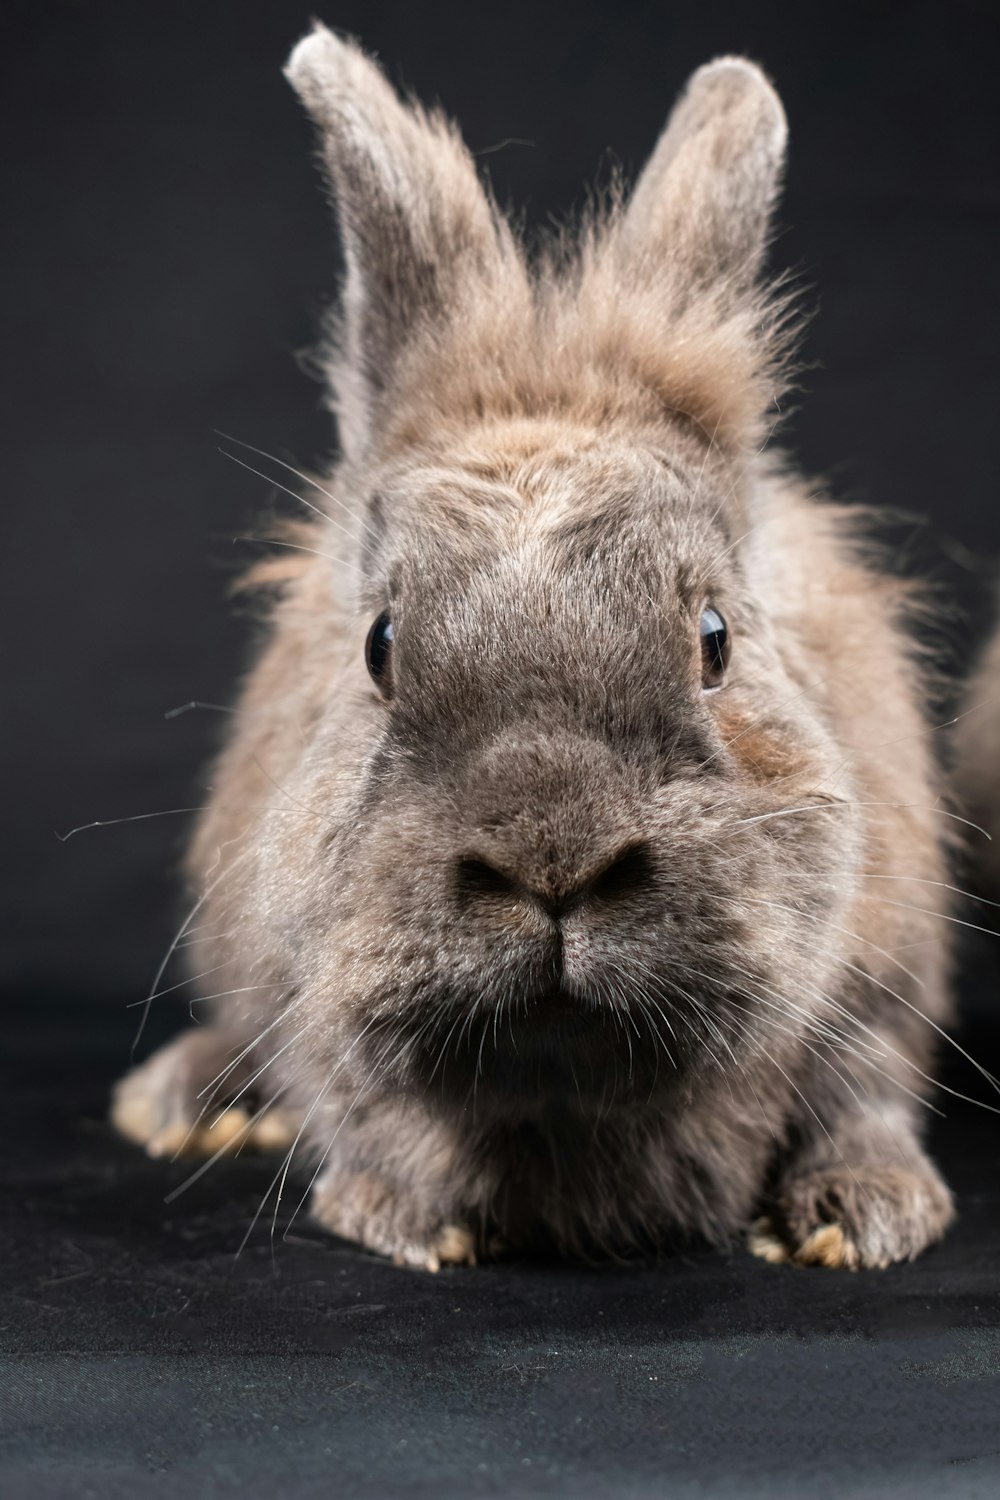 a close up of a rabbit on a black background